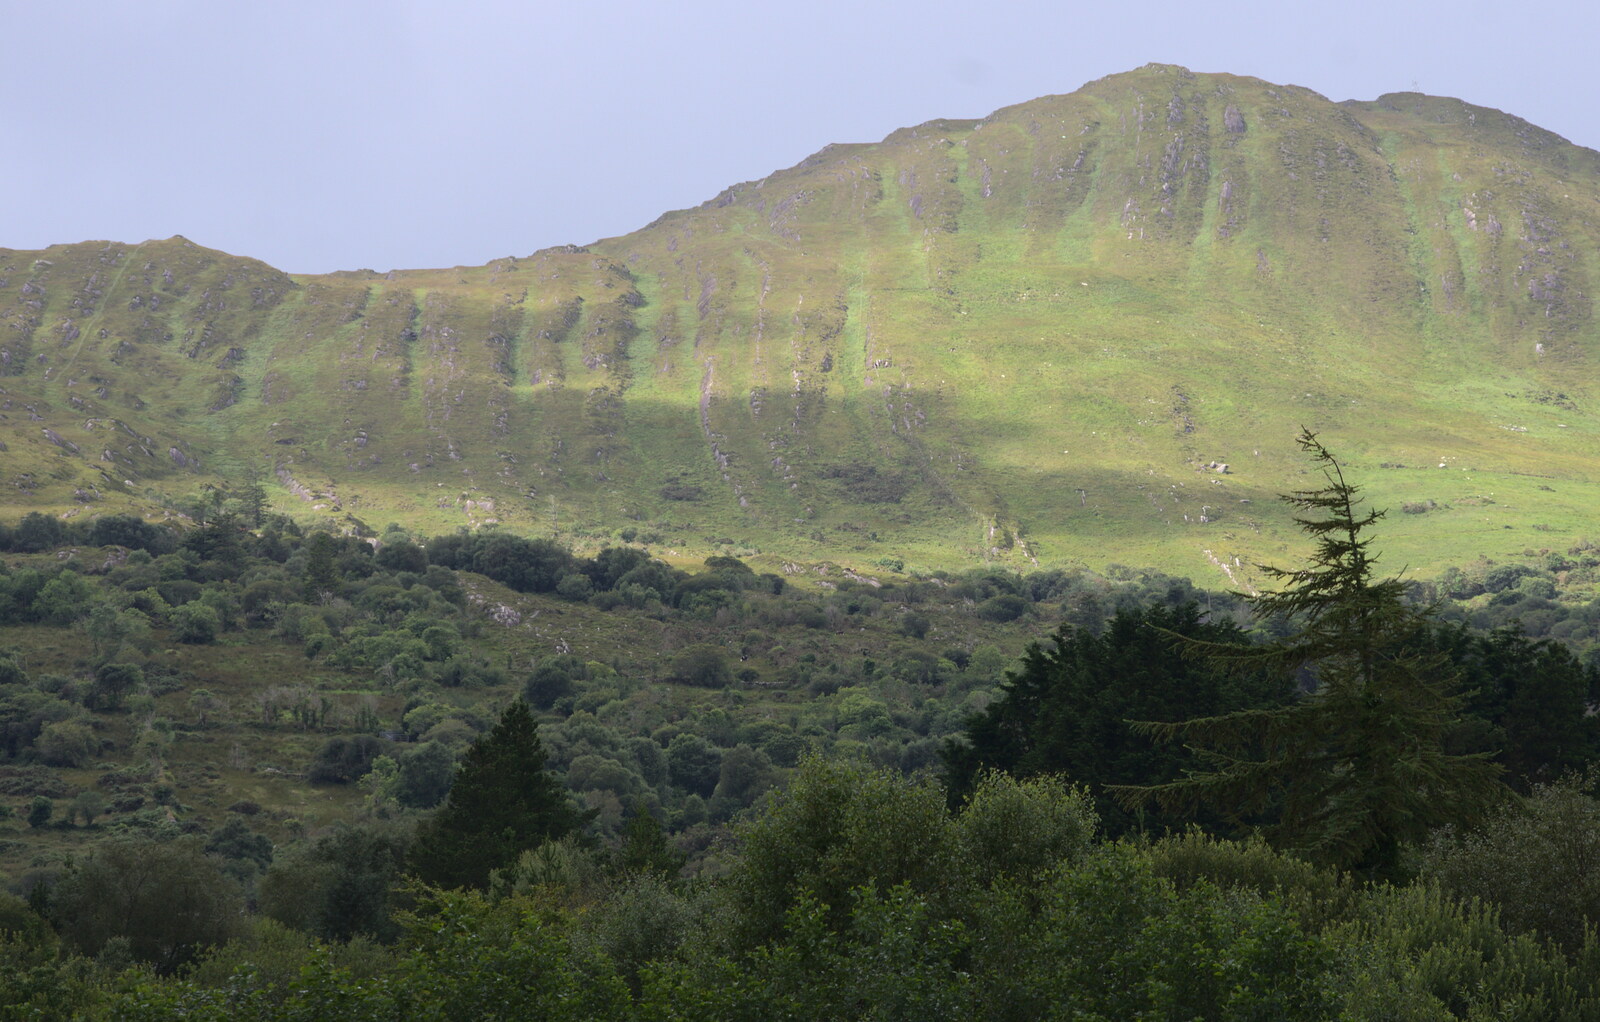 A view of mountains from In The Sneem, An tSnaidhm, Kerry, Ireland - 1st August 2017